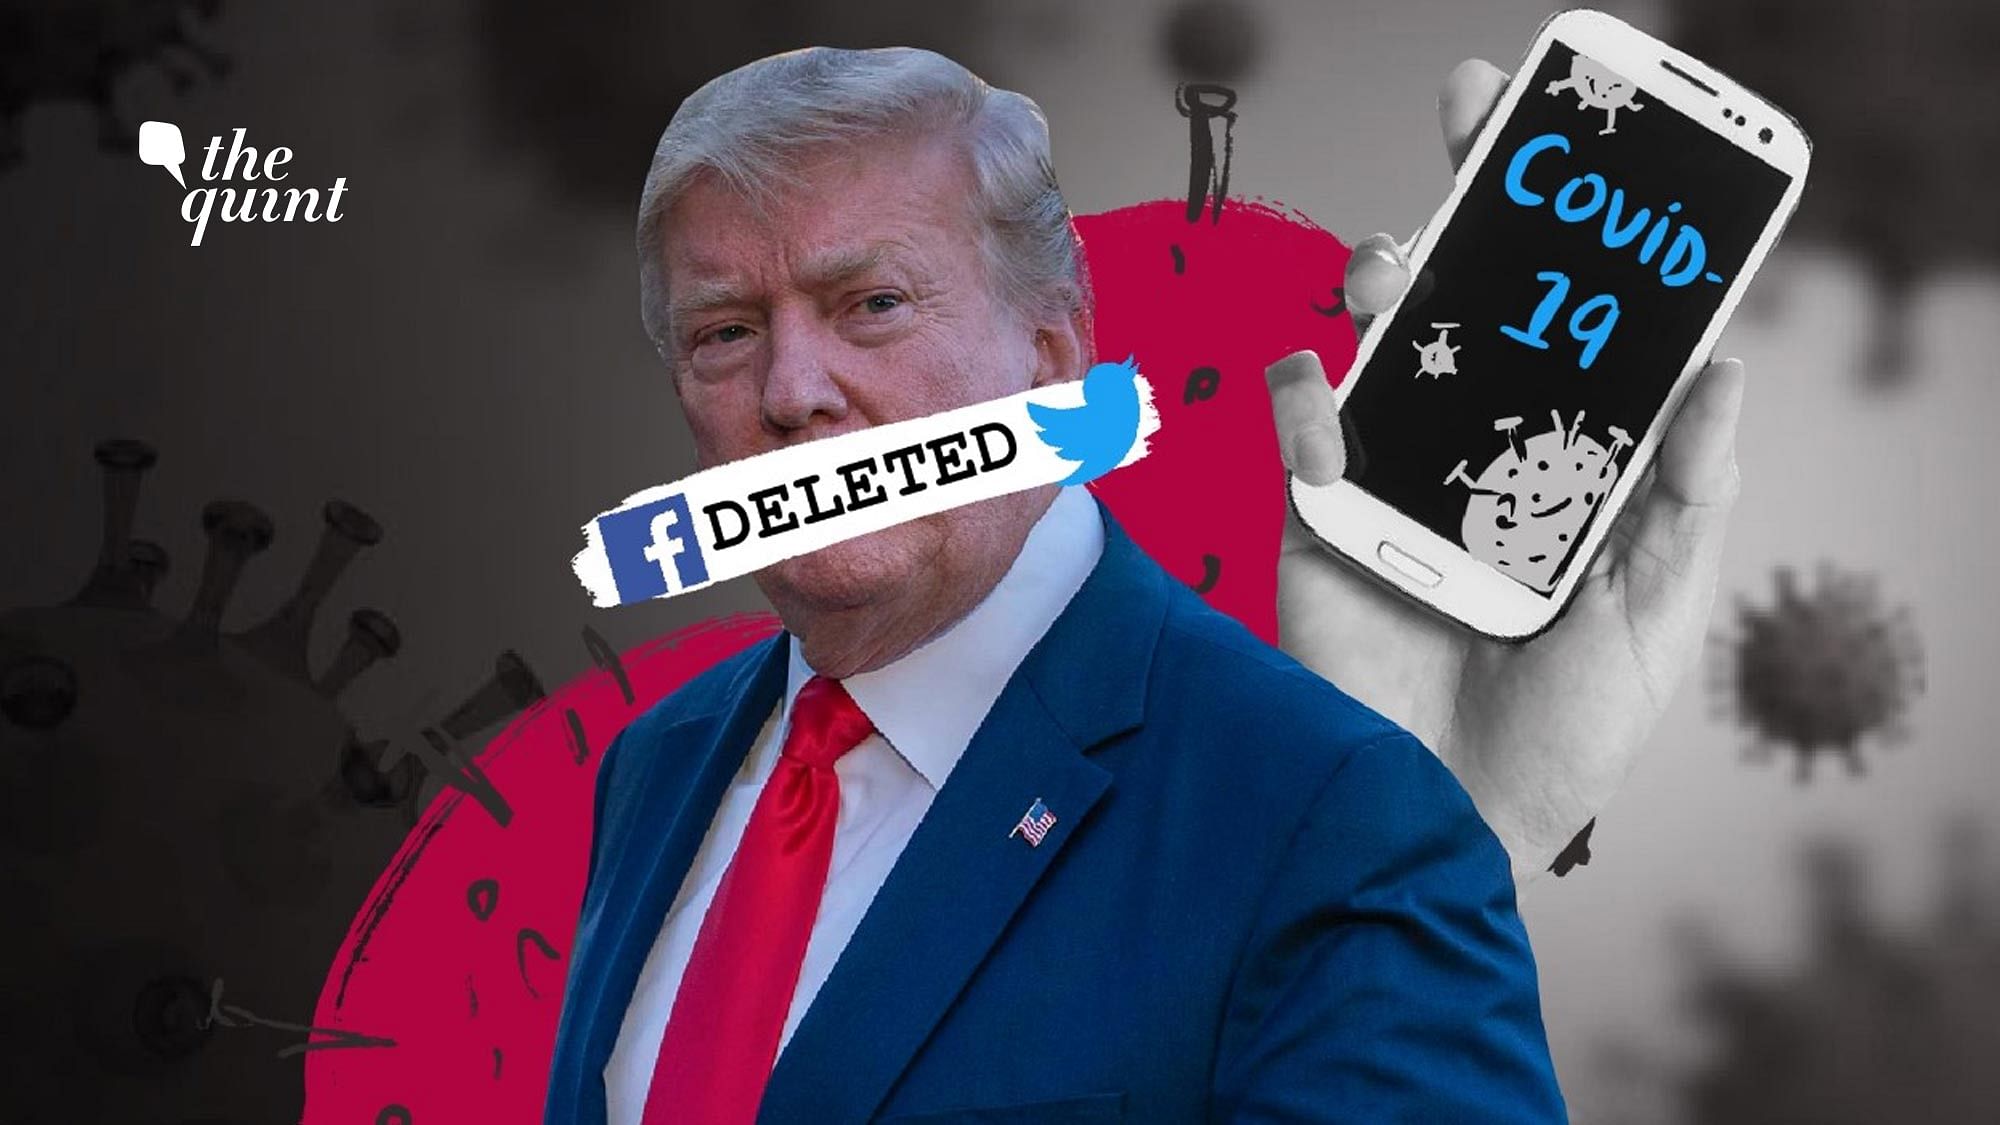 Both, Facebook and Twitter claimed that US President Donald Trump’s video post violated their rules regarding COVID-19 related misinformation.